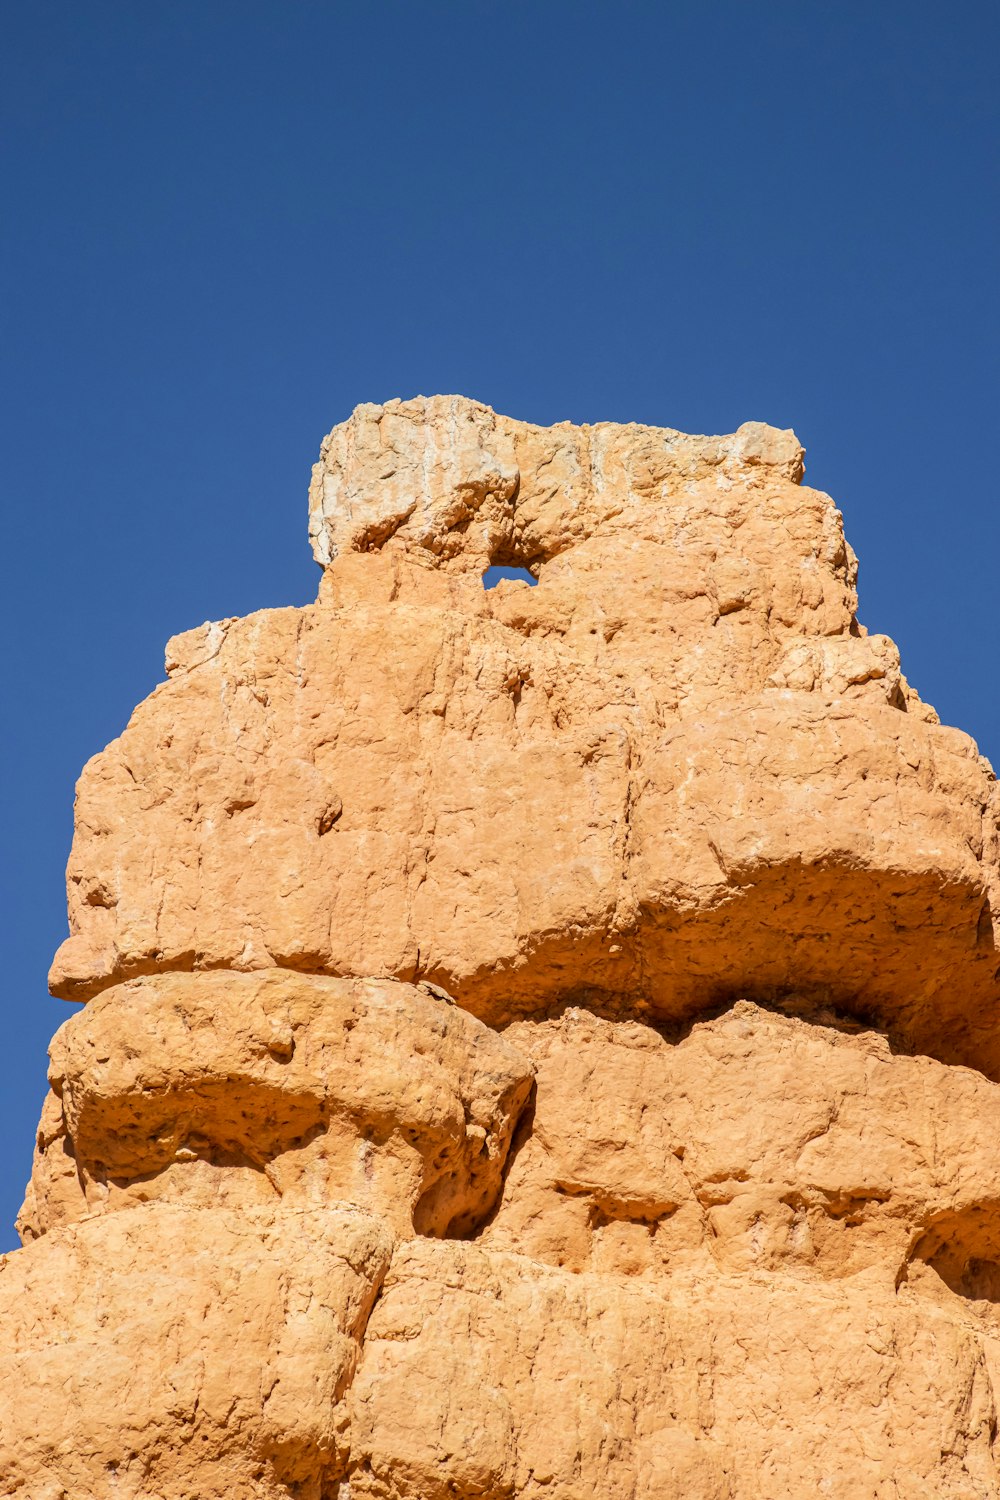 a rock formation with a bird perched on top of it